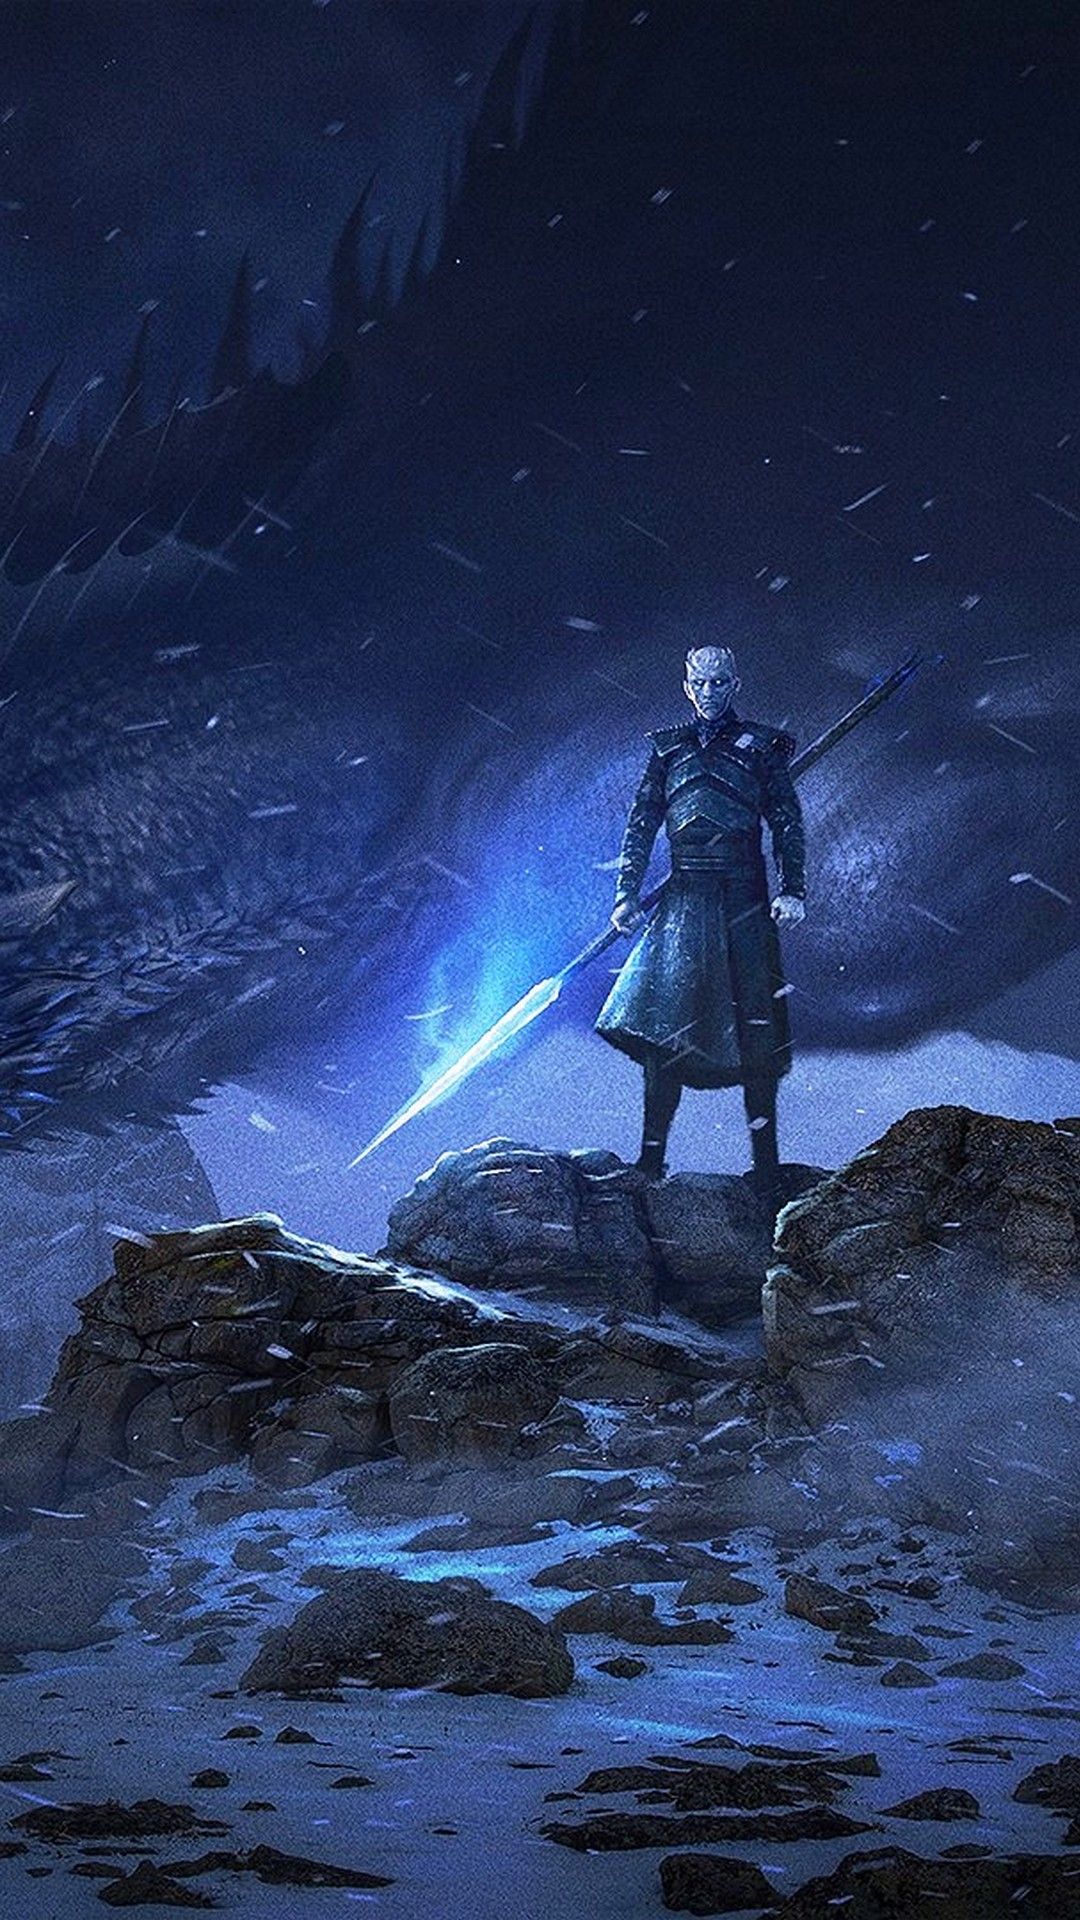 Game Of Thrones Wallaper Wallpaper. Game of thrones poster, Game of thrones artwork, Night king